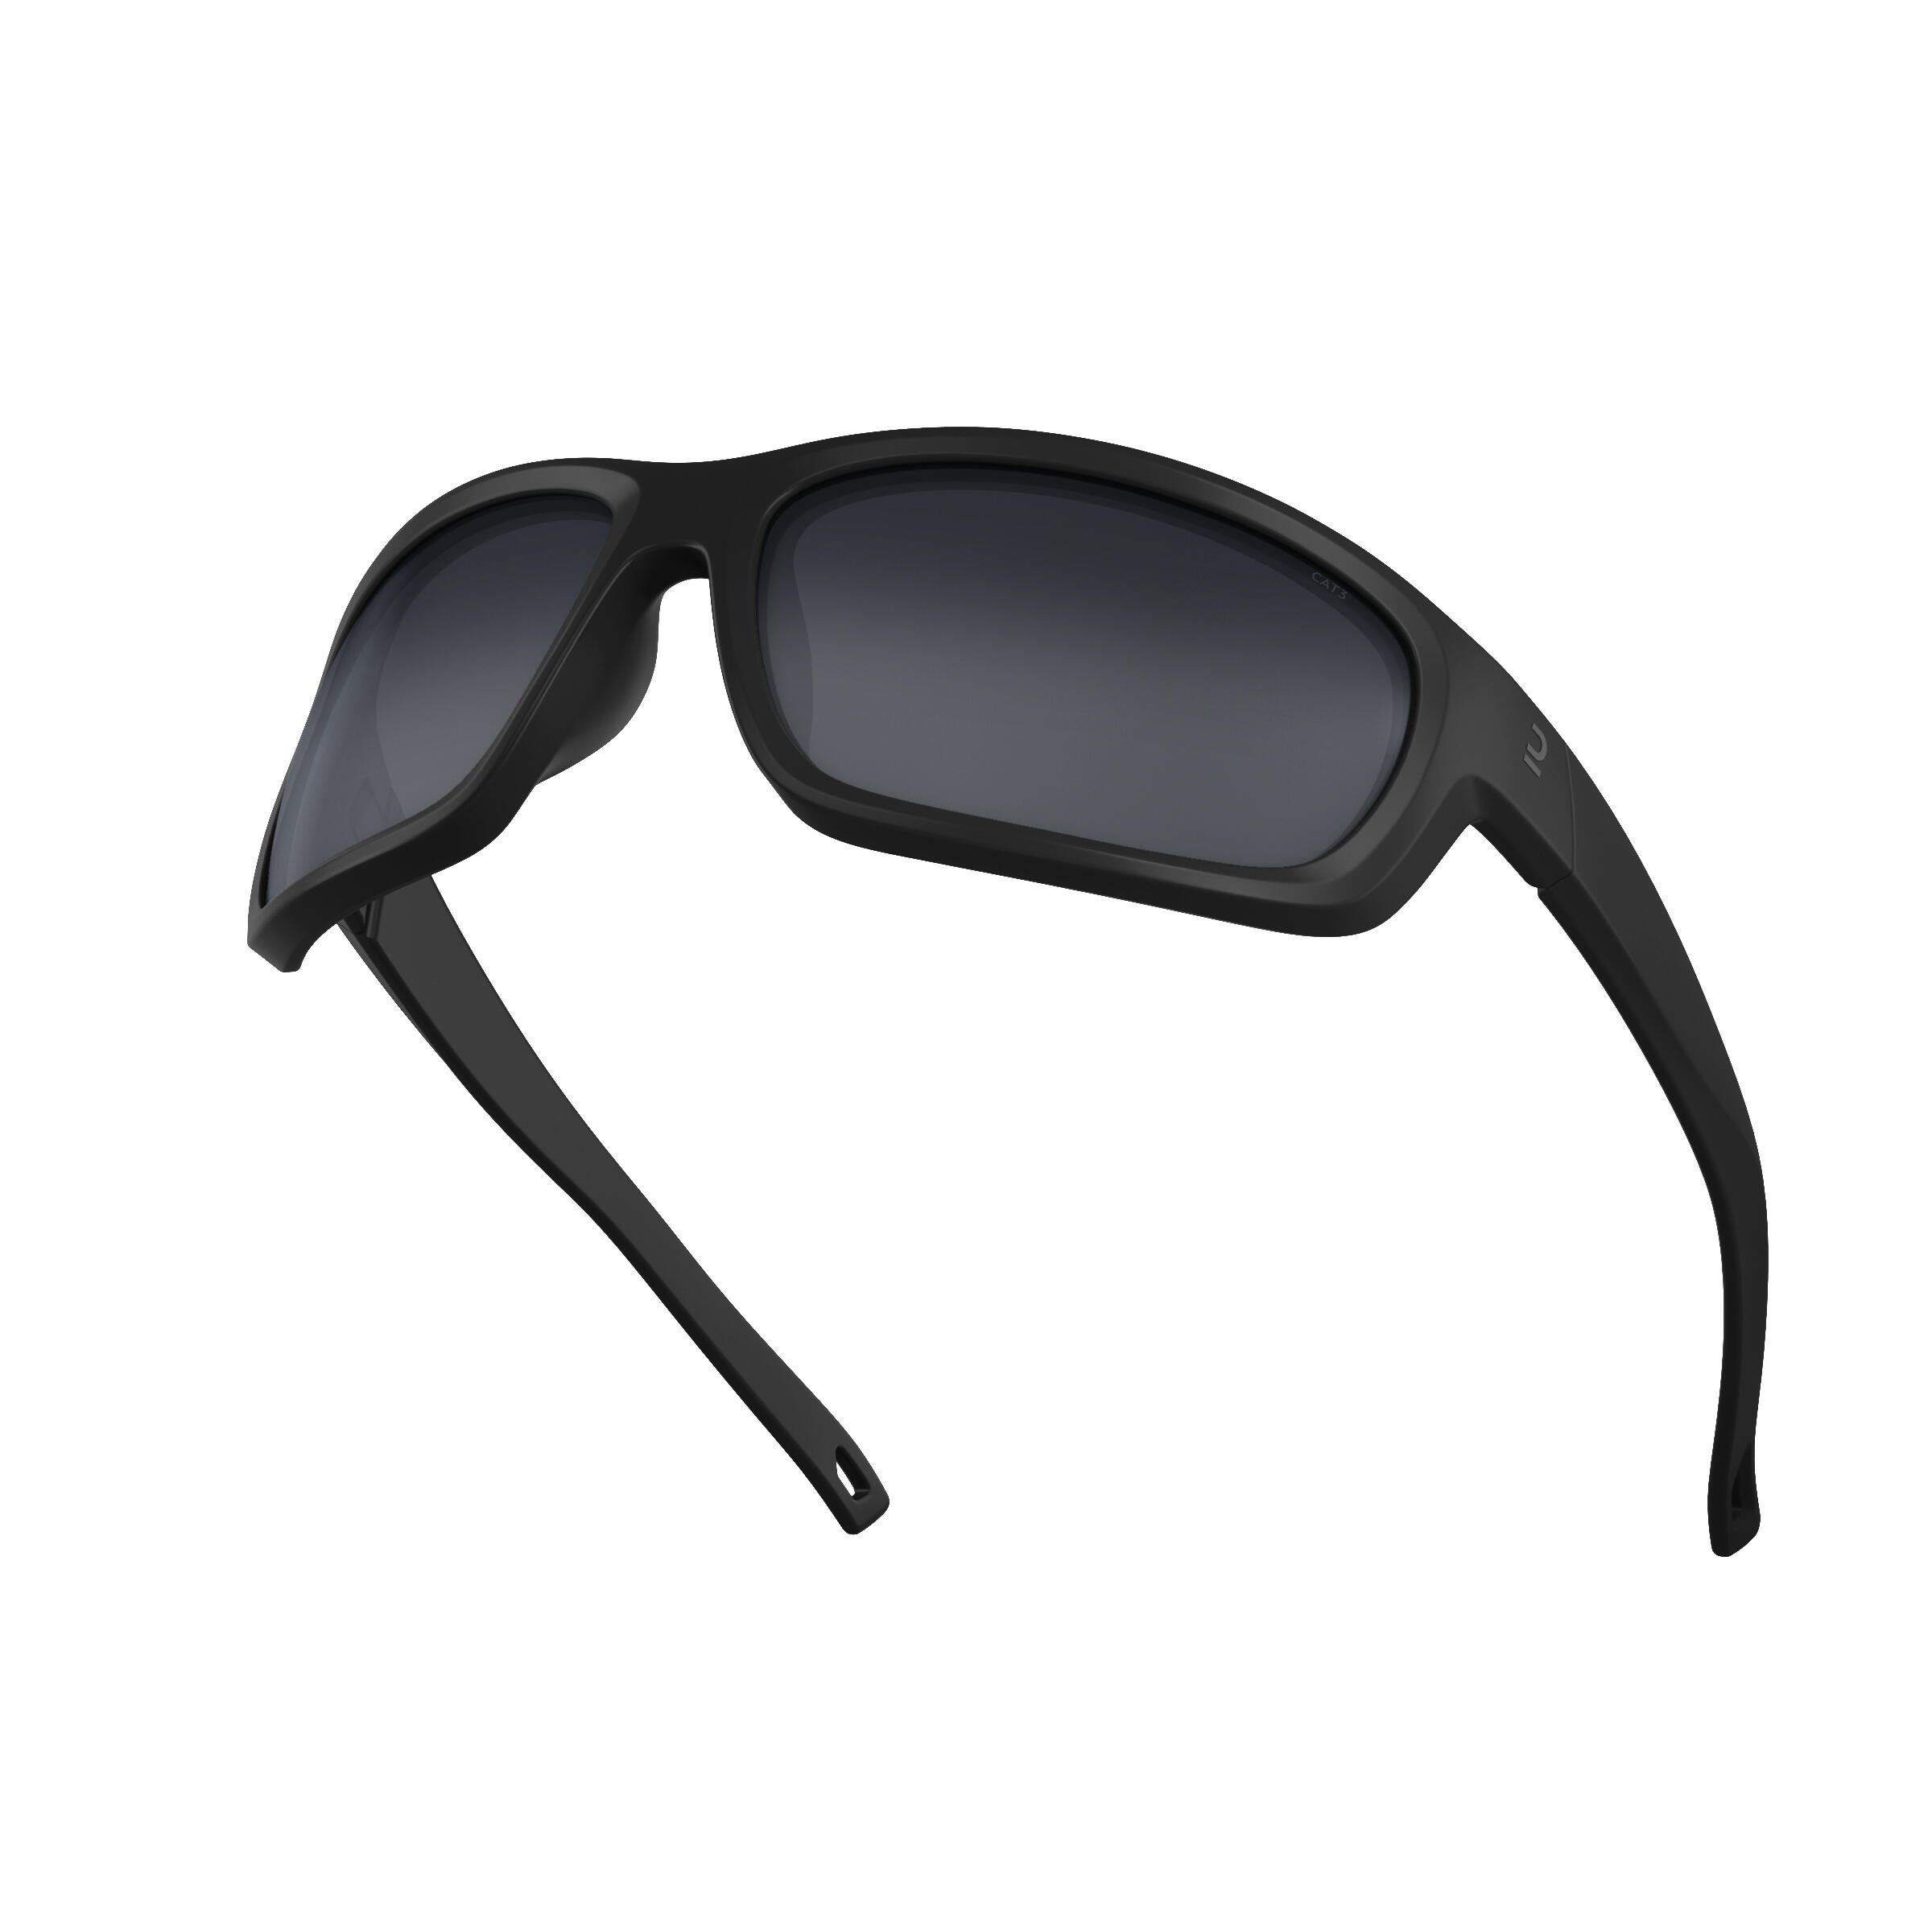 Adults' Hiking Sunglasses MH500 - Category 3 6/11